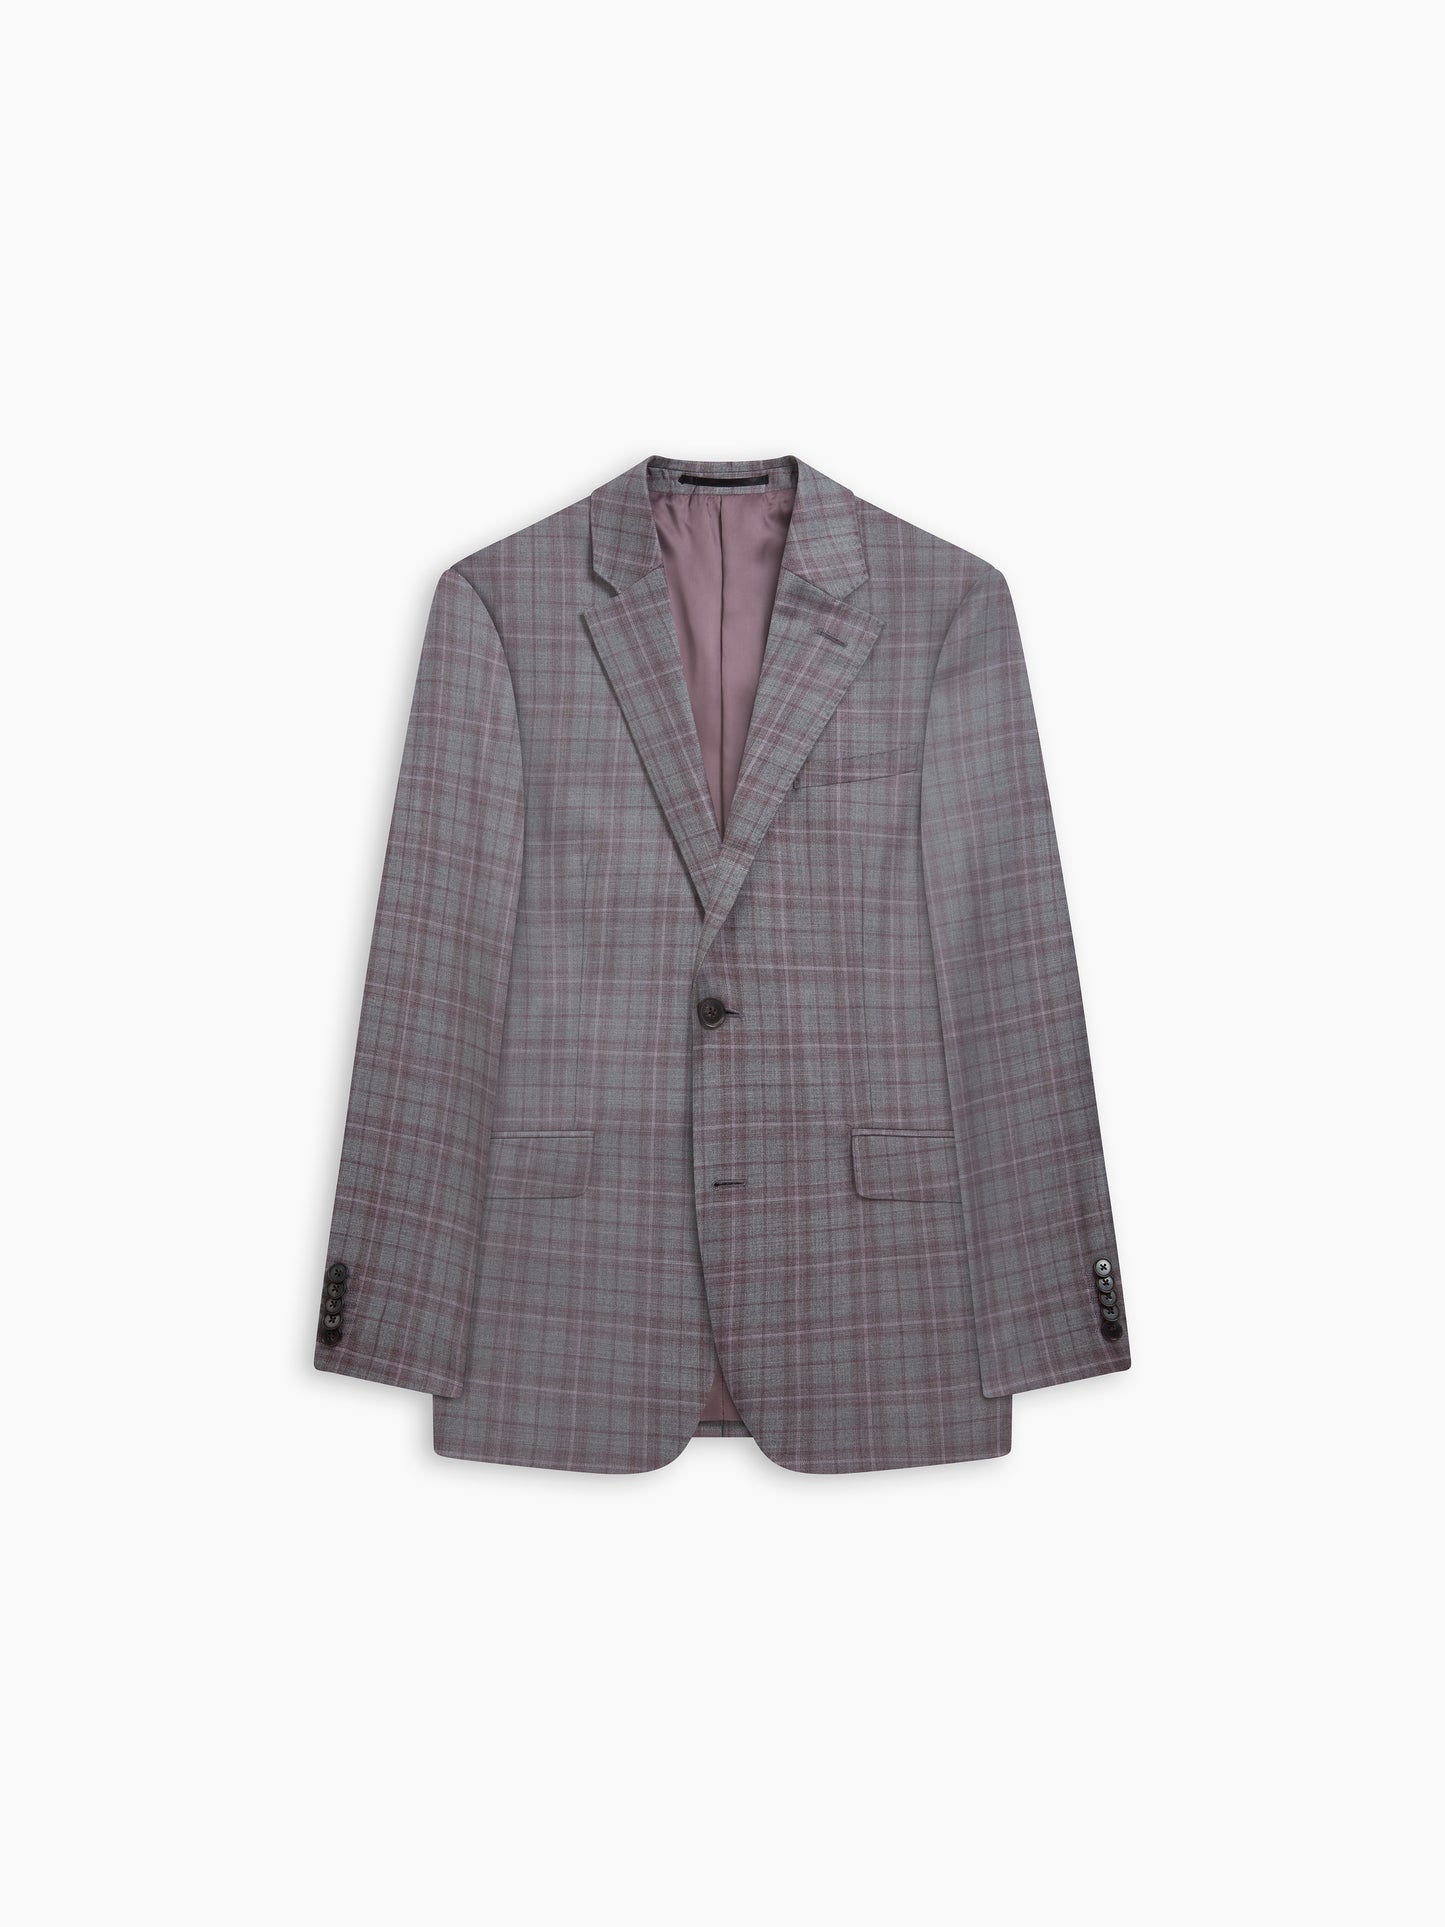 Highgrove Woven in Italy Slim Fit Grey Check Jacket